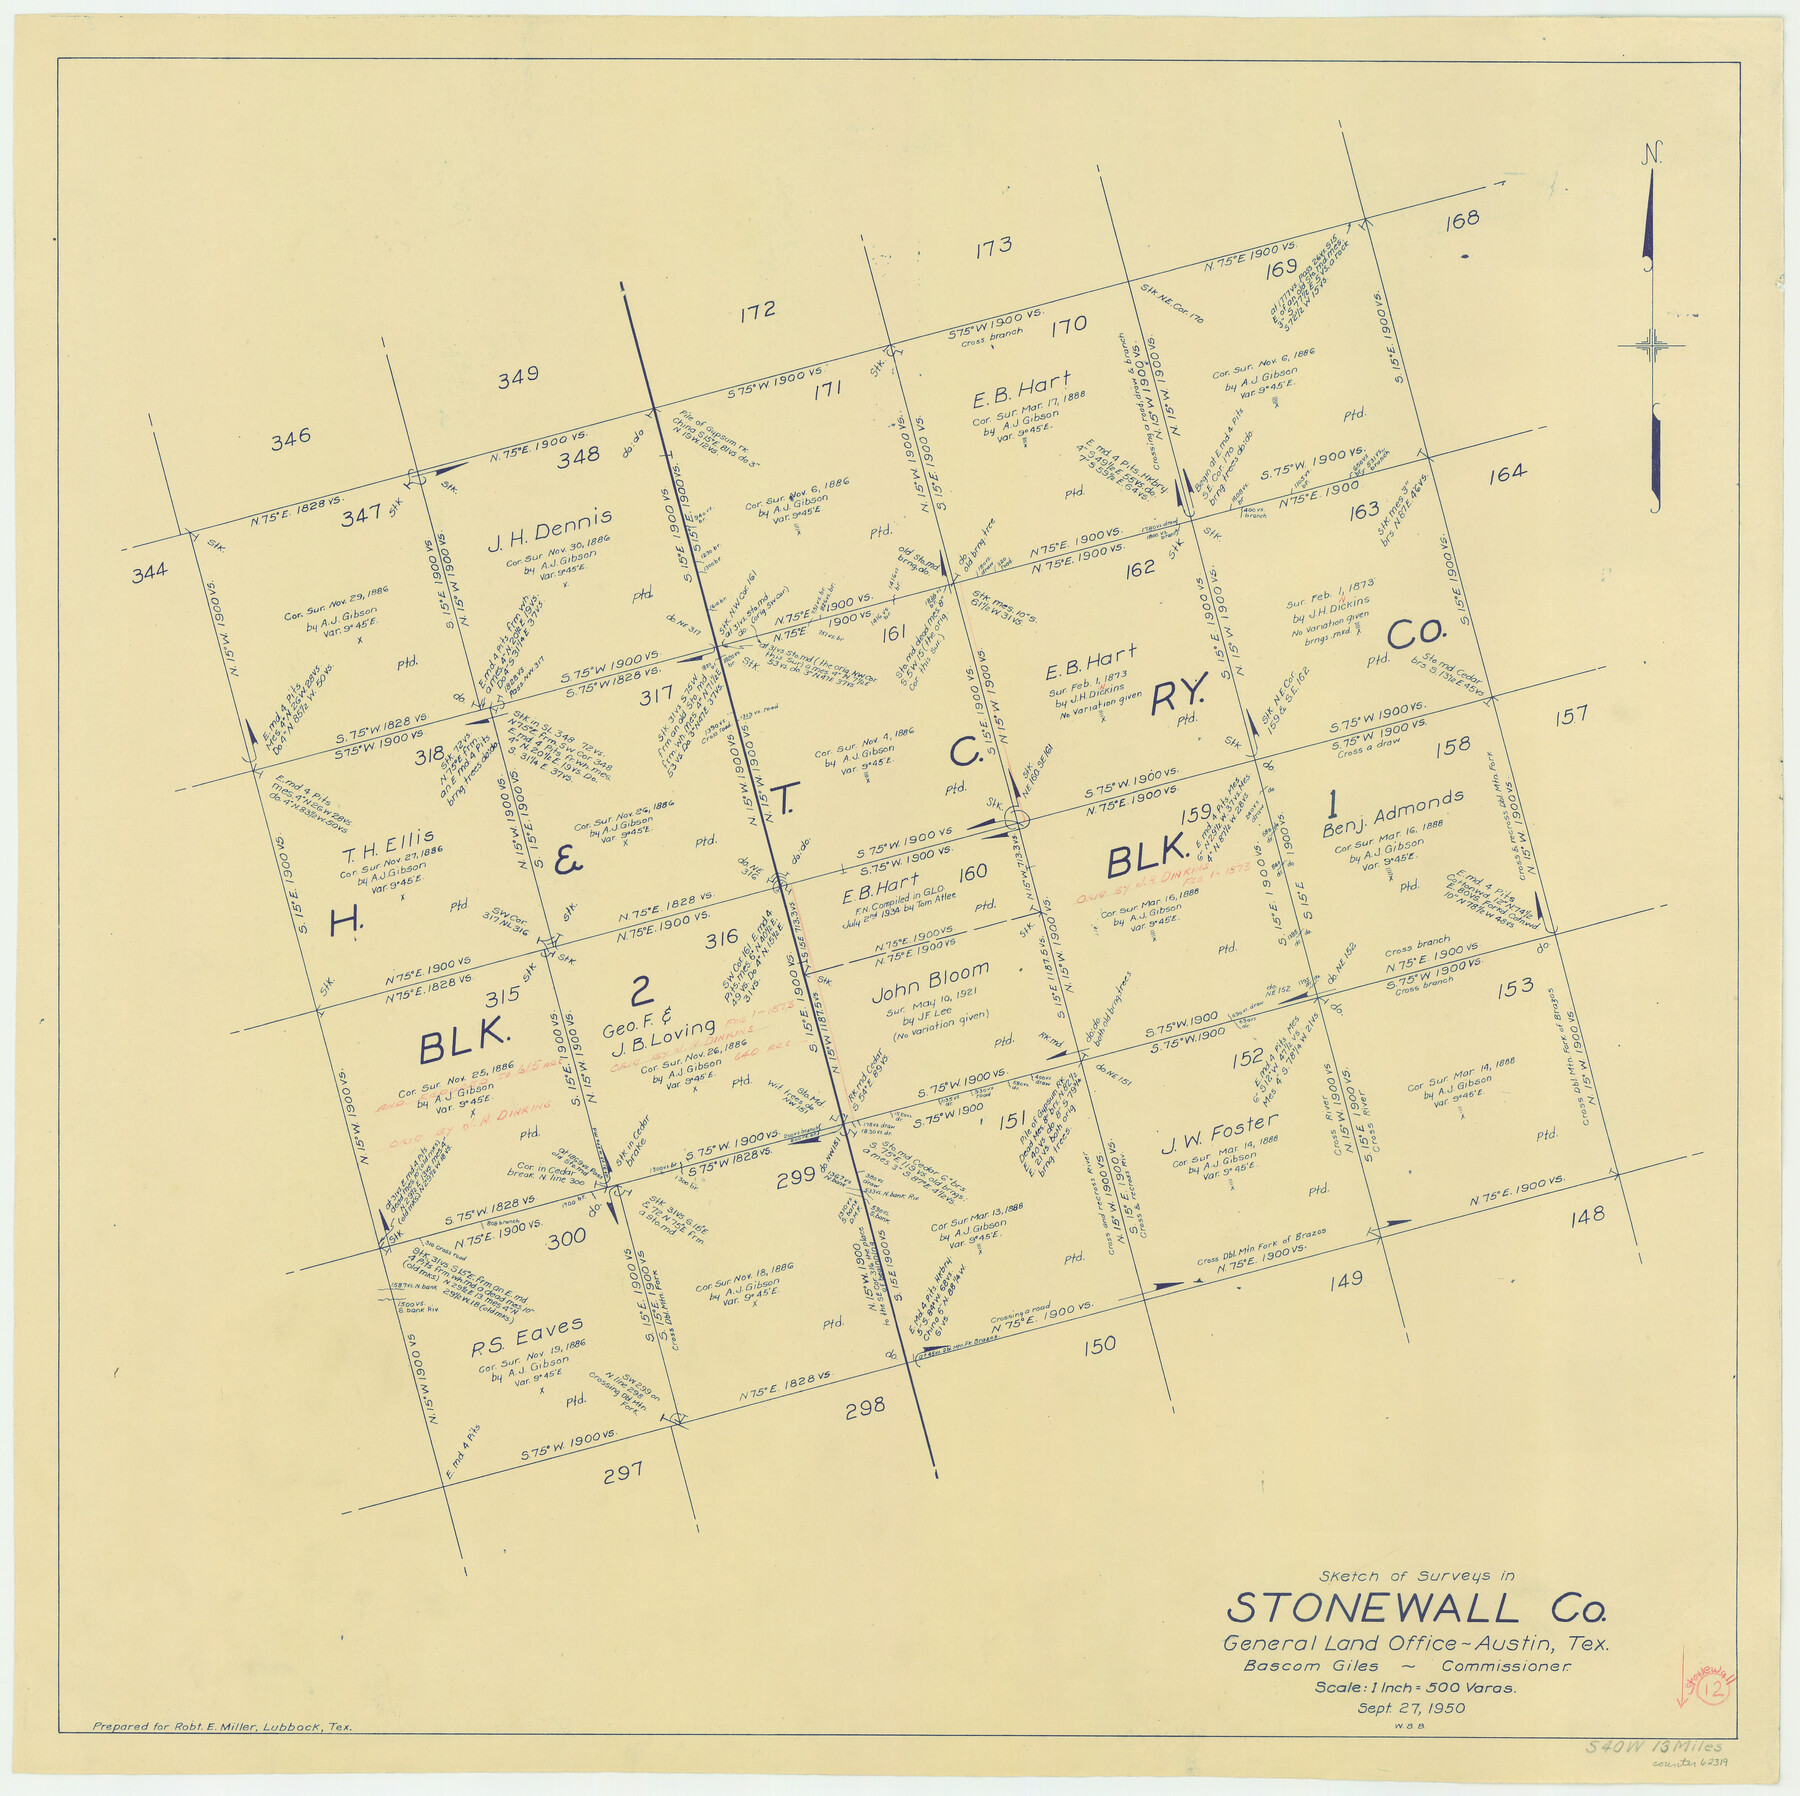 62319, Stonewall County Working Sketch 12, General Map Collection